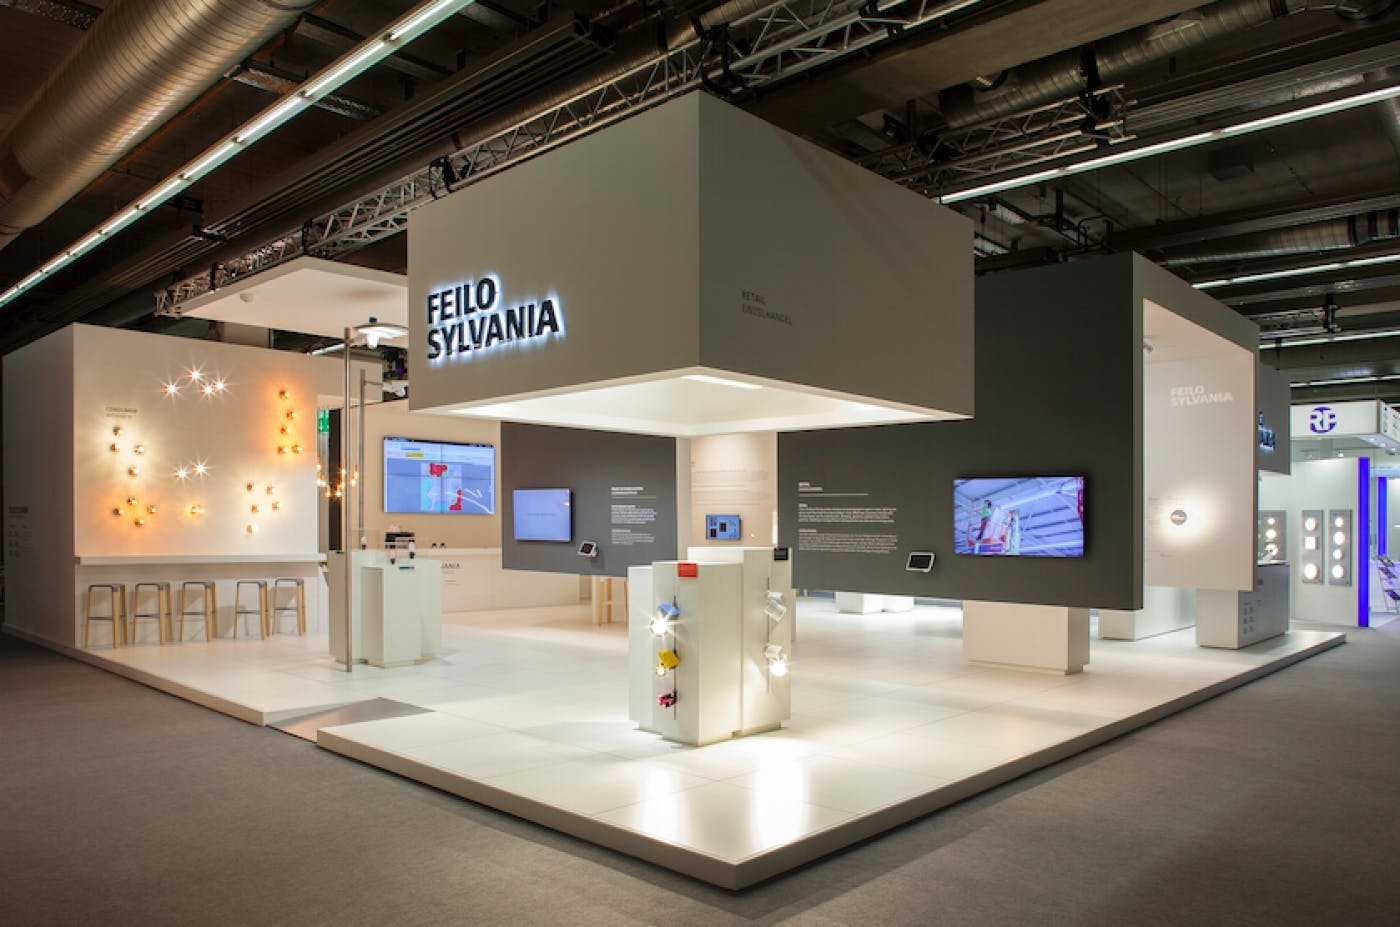 ScreenCloud Article - How Architectural Lighting Solutions Company Feilo Sylvania Attracted over 5000 Visitors to Their Exhibition Stand Using ScreenCloud